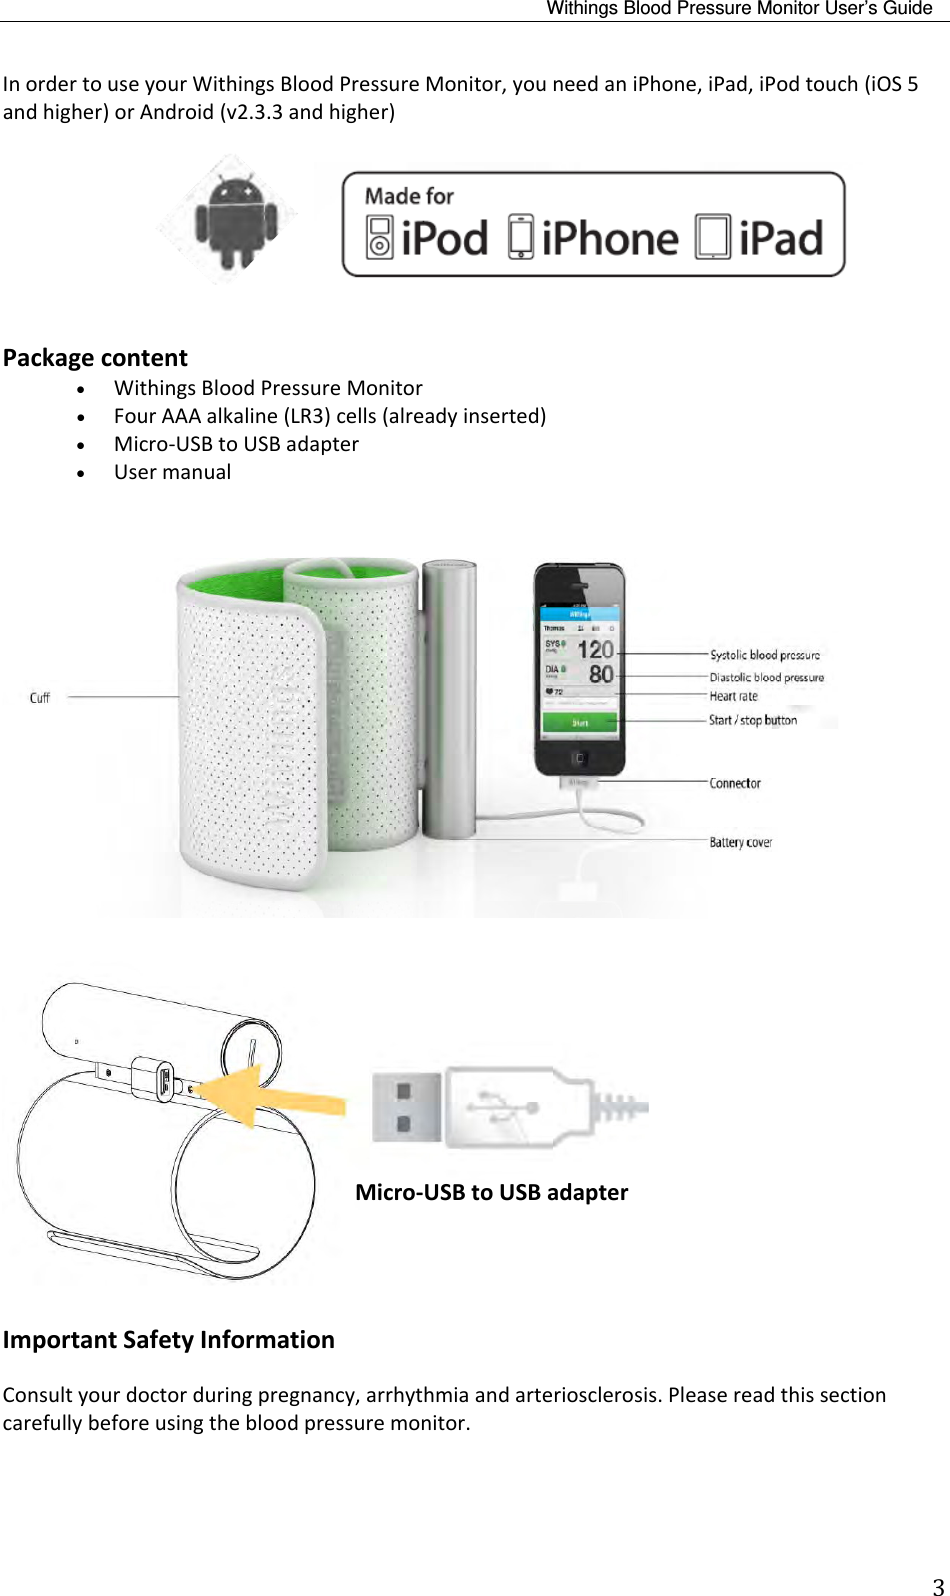 Withings Blood Pressure Monitor User’s Guide 3InordertouseyourWithingsBloodPressureMonitor,youneedaniPhone,iPad,iPodtouch(iOS5andhigher)orAndroid(v2.3.3andhigher)  Packagecontent WithingsBloodPressureMonitor FourAAAalkaline(LR3)cells(alreadyinserted) Micro‐USBtoUSBadapter UsermanualImportantSafetyInformationConsultyourdoctorduringpregnancy,arrhythmiaandarteriosclerosis.Pleasereadthissectioncarefullybeforeusingthebloodpressuremonitor.Micro‐USBtoUSBadapter